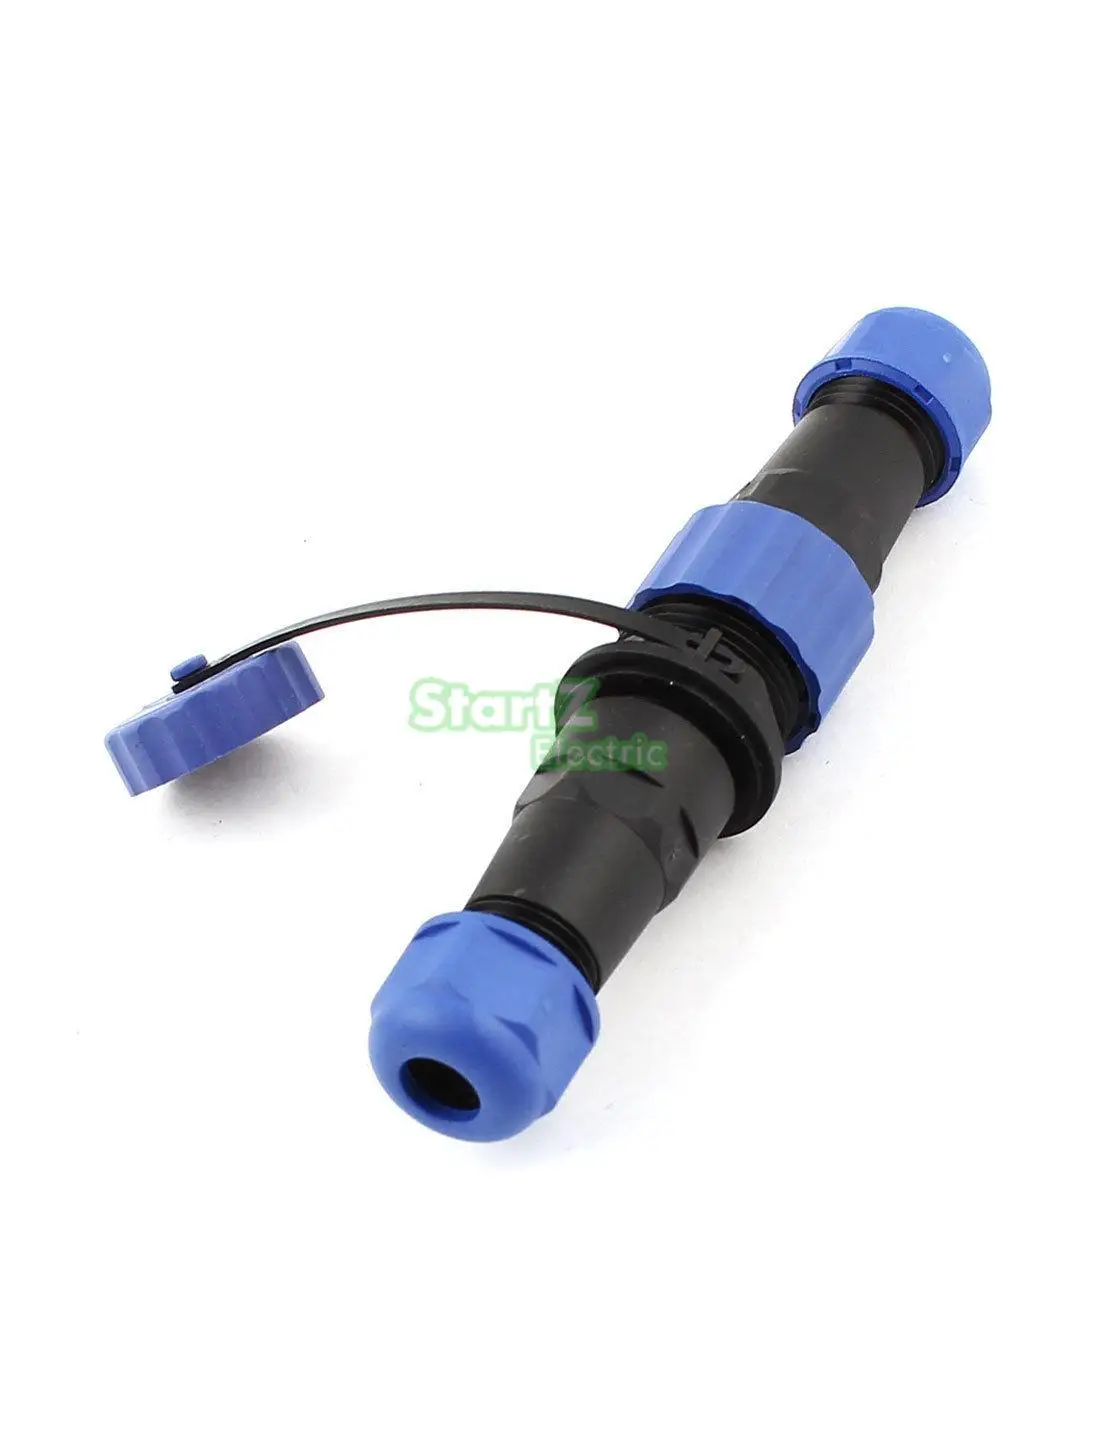 4 Pin Pair Waterproof Aviation Cable Connector Plug w Socket IP68 SP16-4 